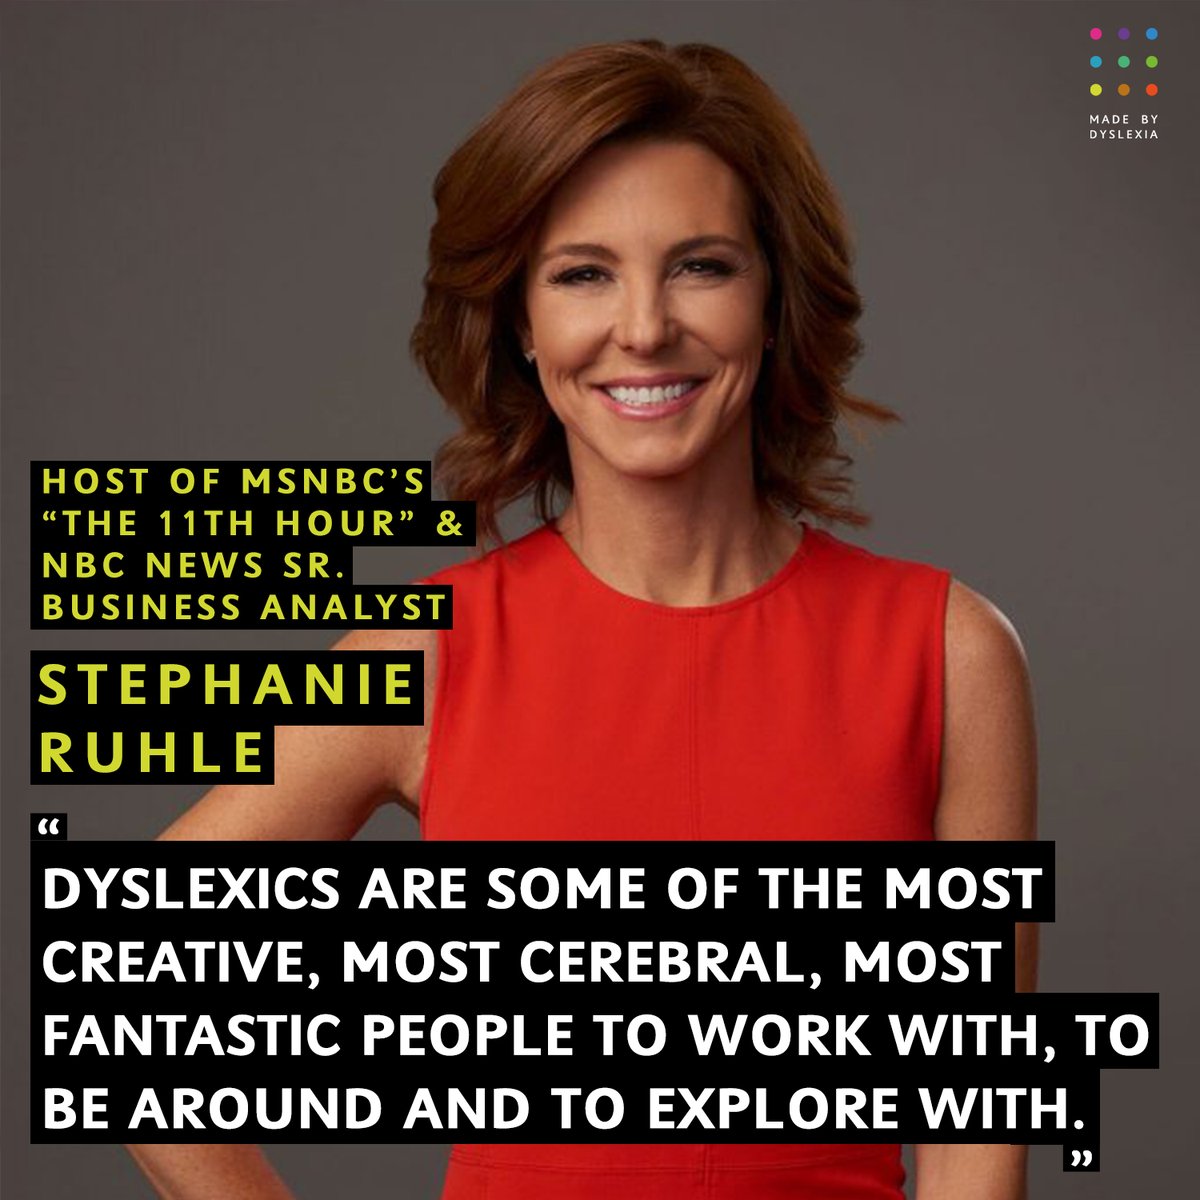 I can’t disagree with this #WednesdayWisdom from one of America’s most-loved news hosts, @SRuhle Hear more of her wisdom in this week's episode of our podcast #LessonsInDyslexicThinking 🎧Listen to the full episode on Spotify or Amazon Or watch it here: bit.ly/45fuzar